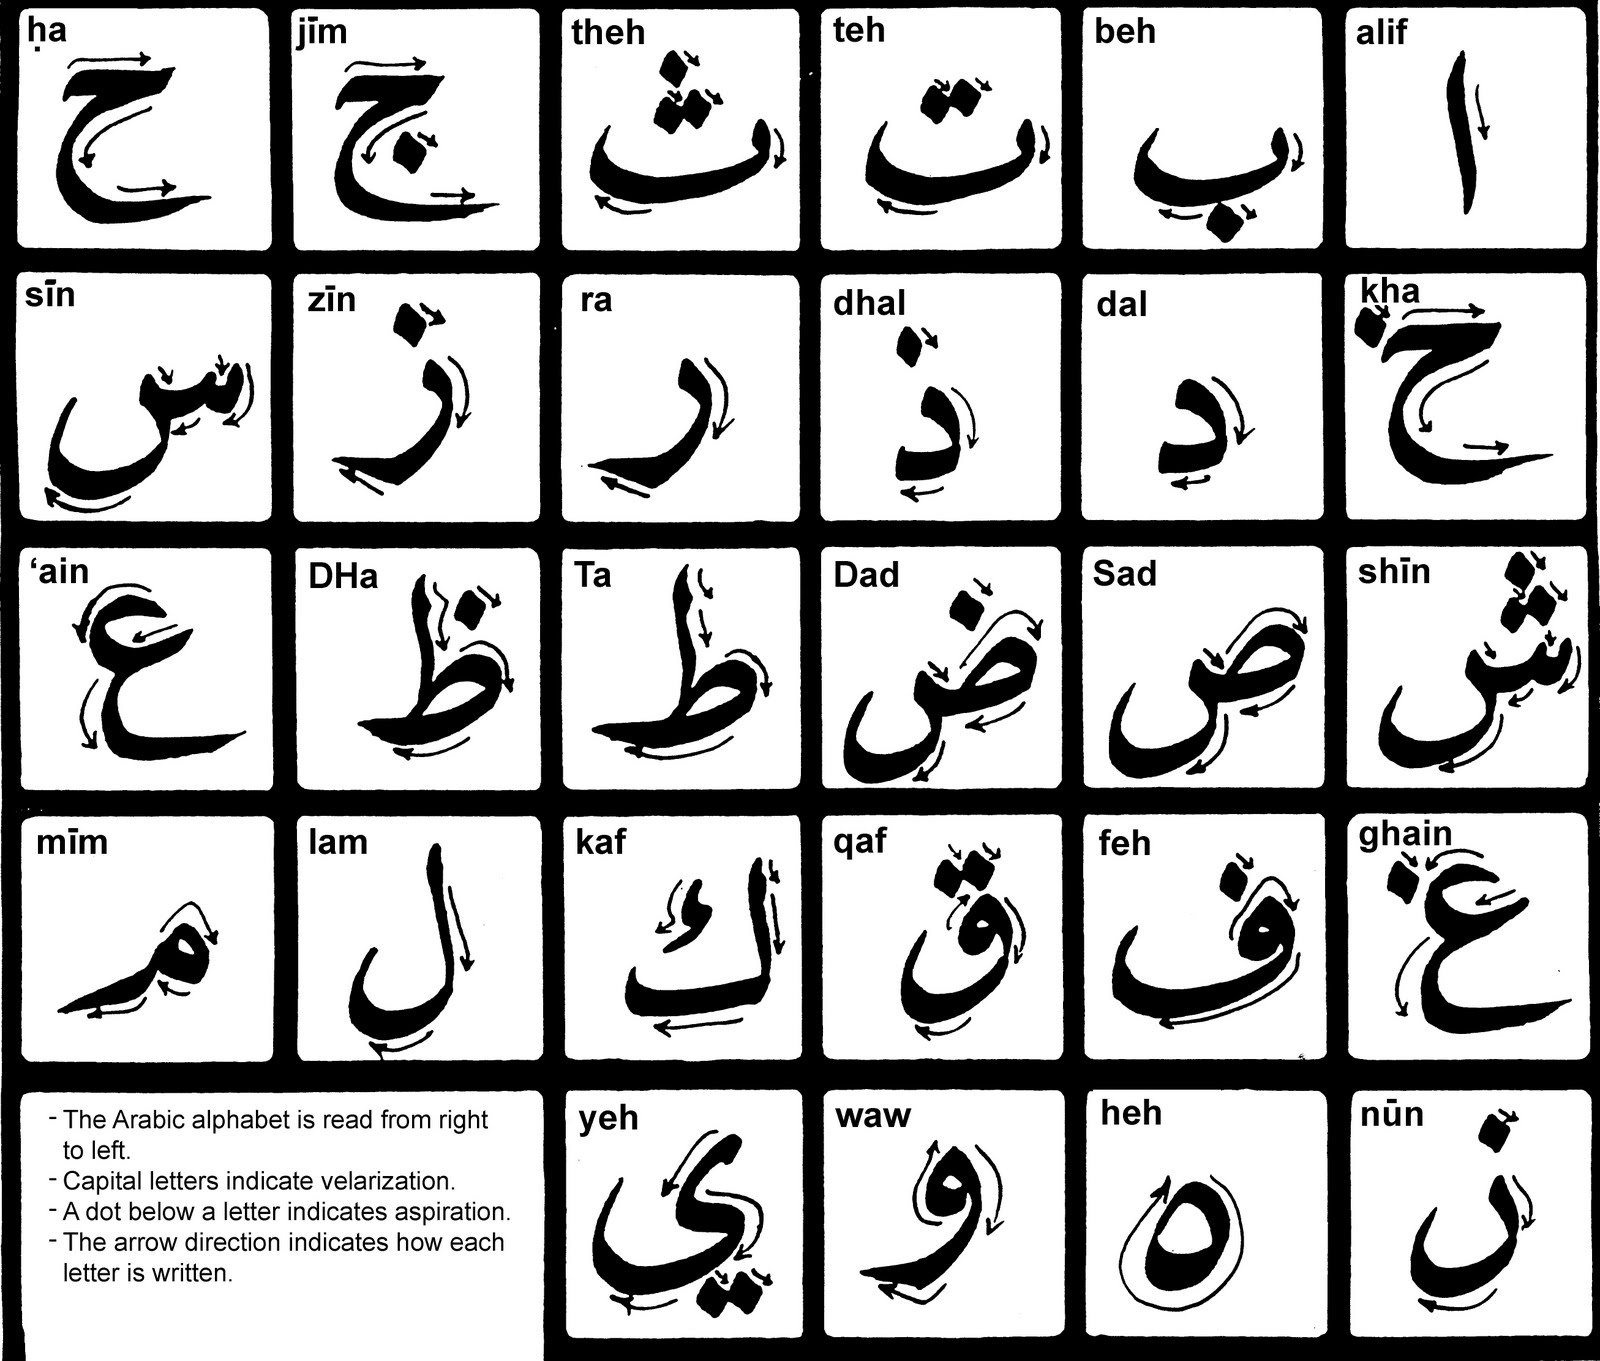 The Arabic Learner: Learning the Arabic Alphabet 1: Resources and